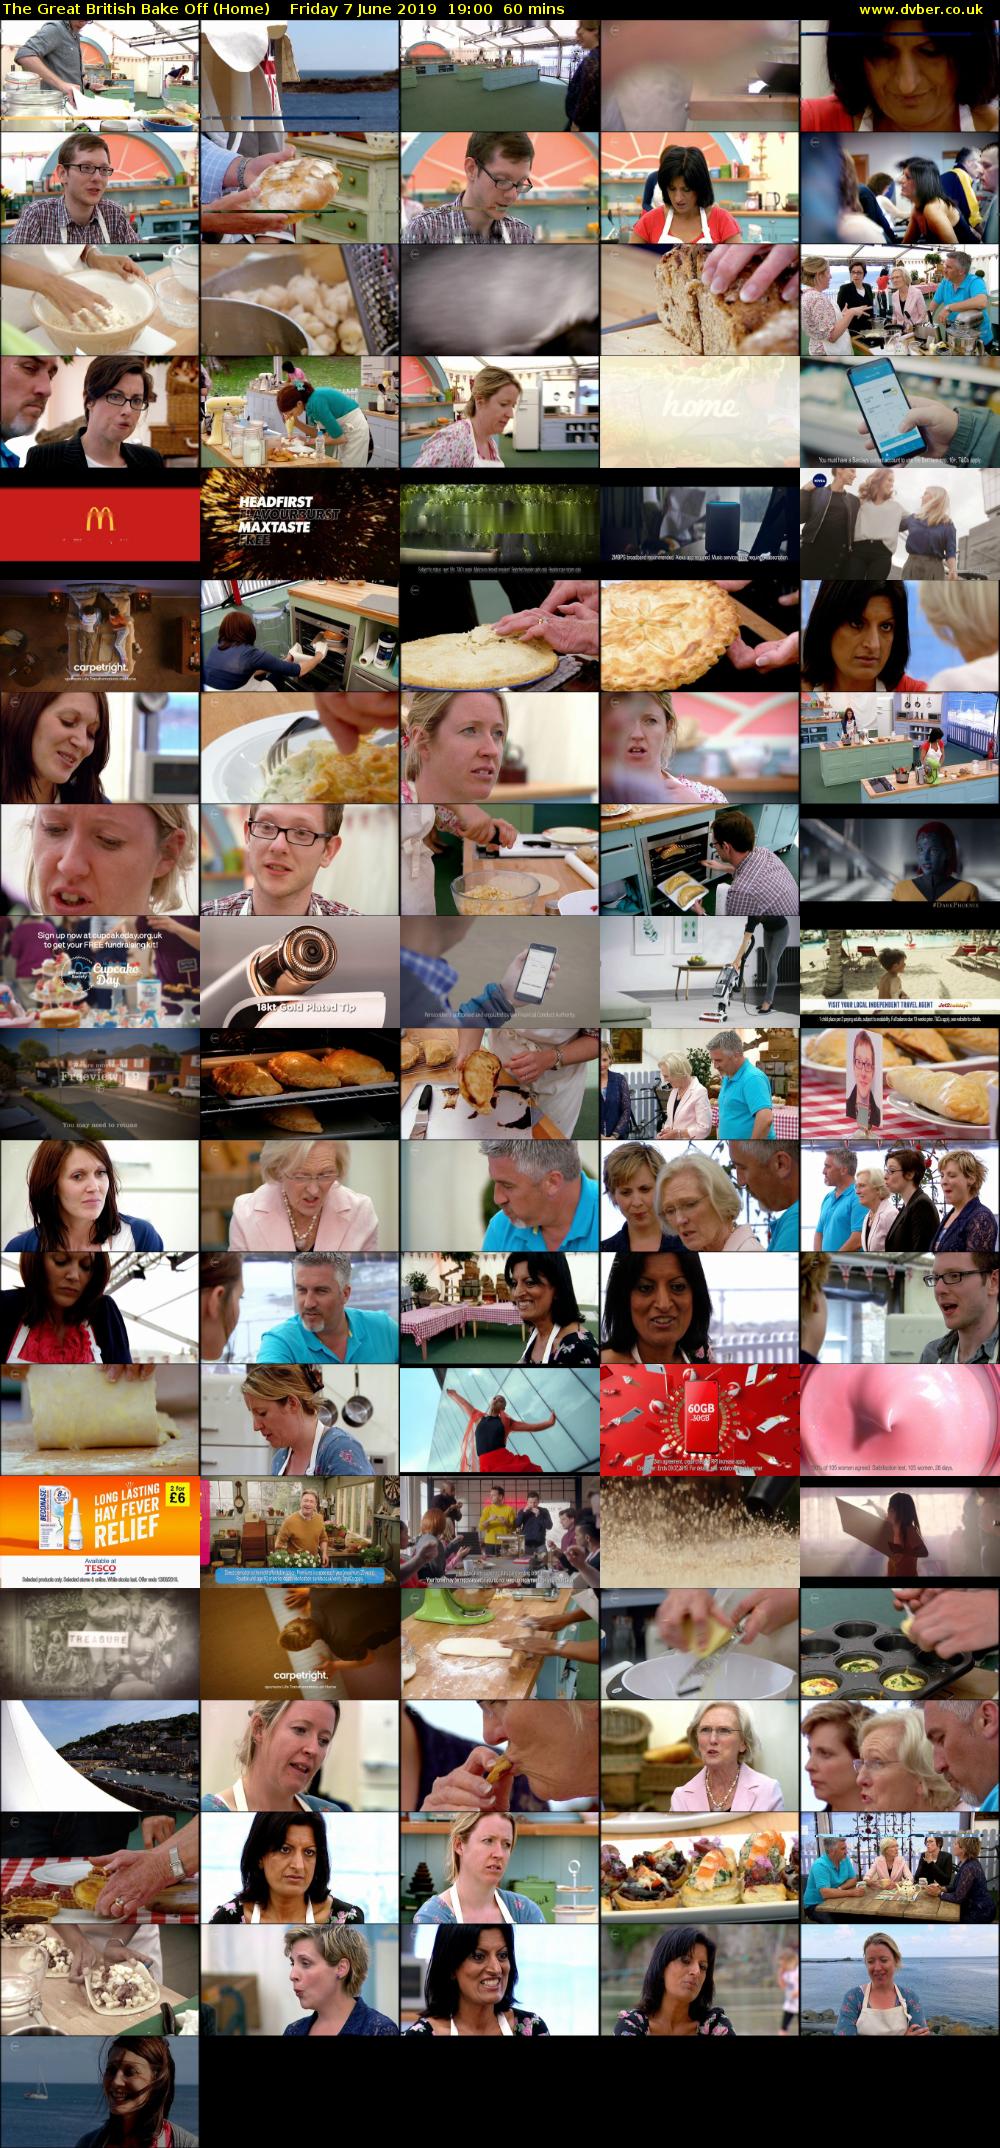 The Great British Bake Off (Home) Friday 7 June 2019 19:00 - 20:00